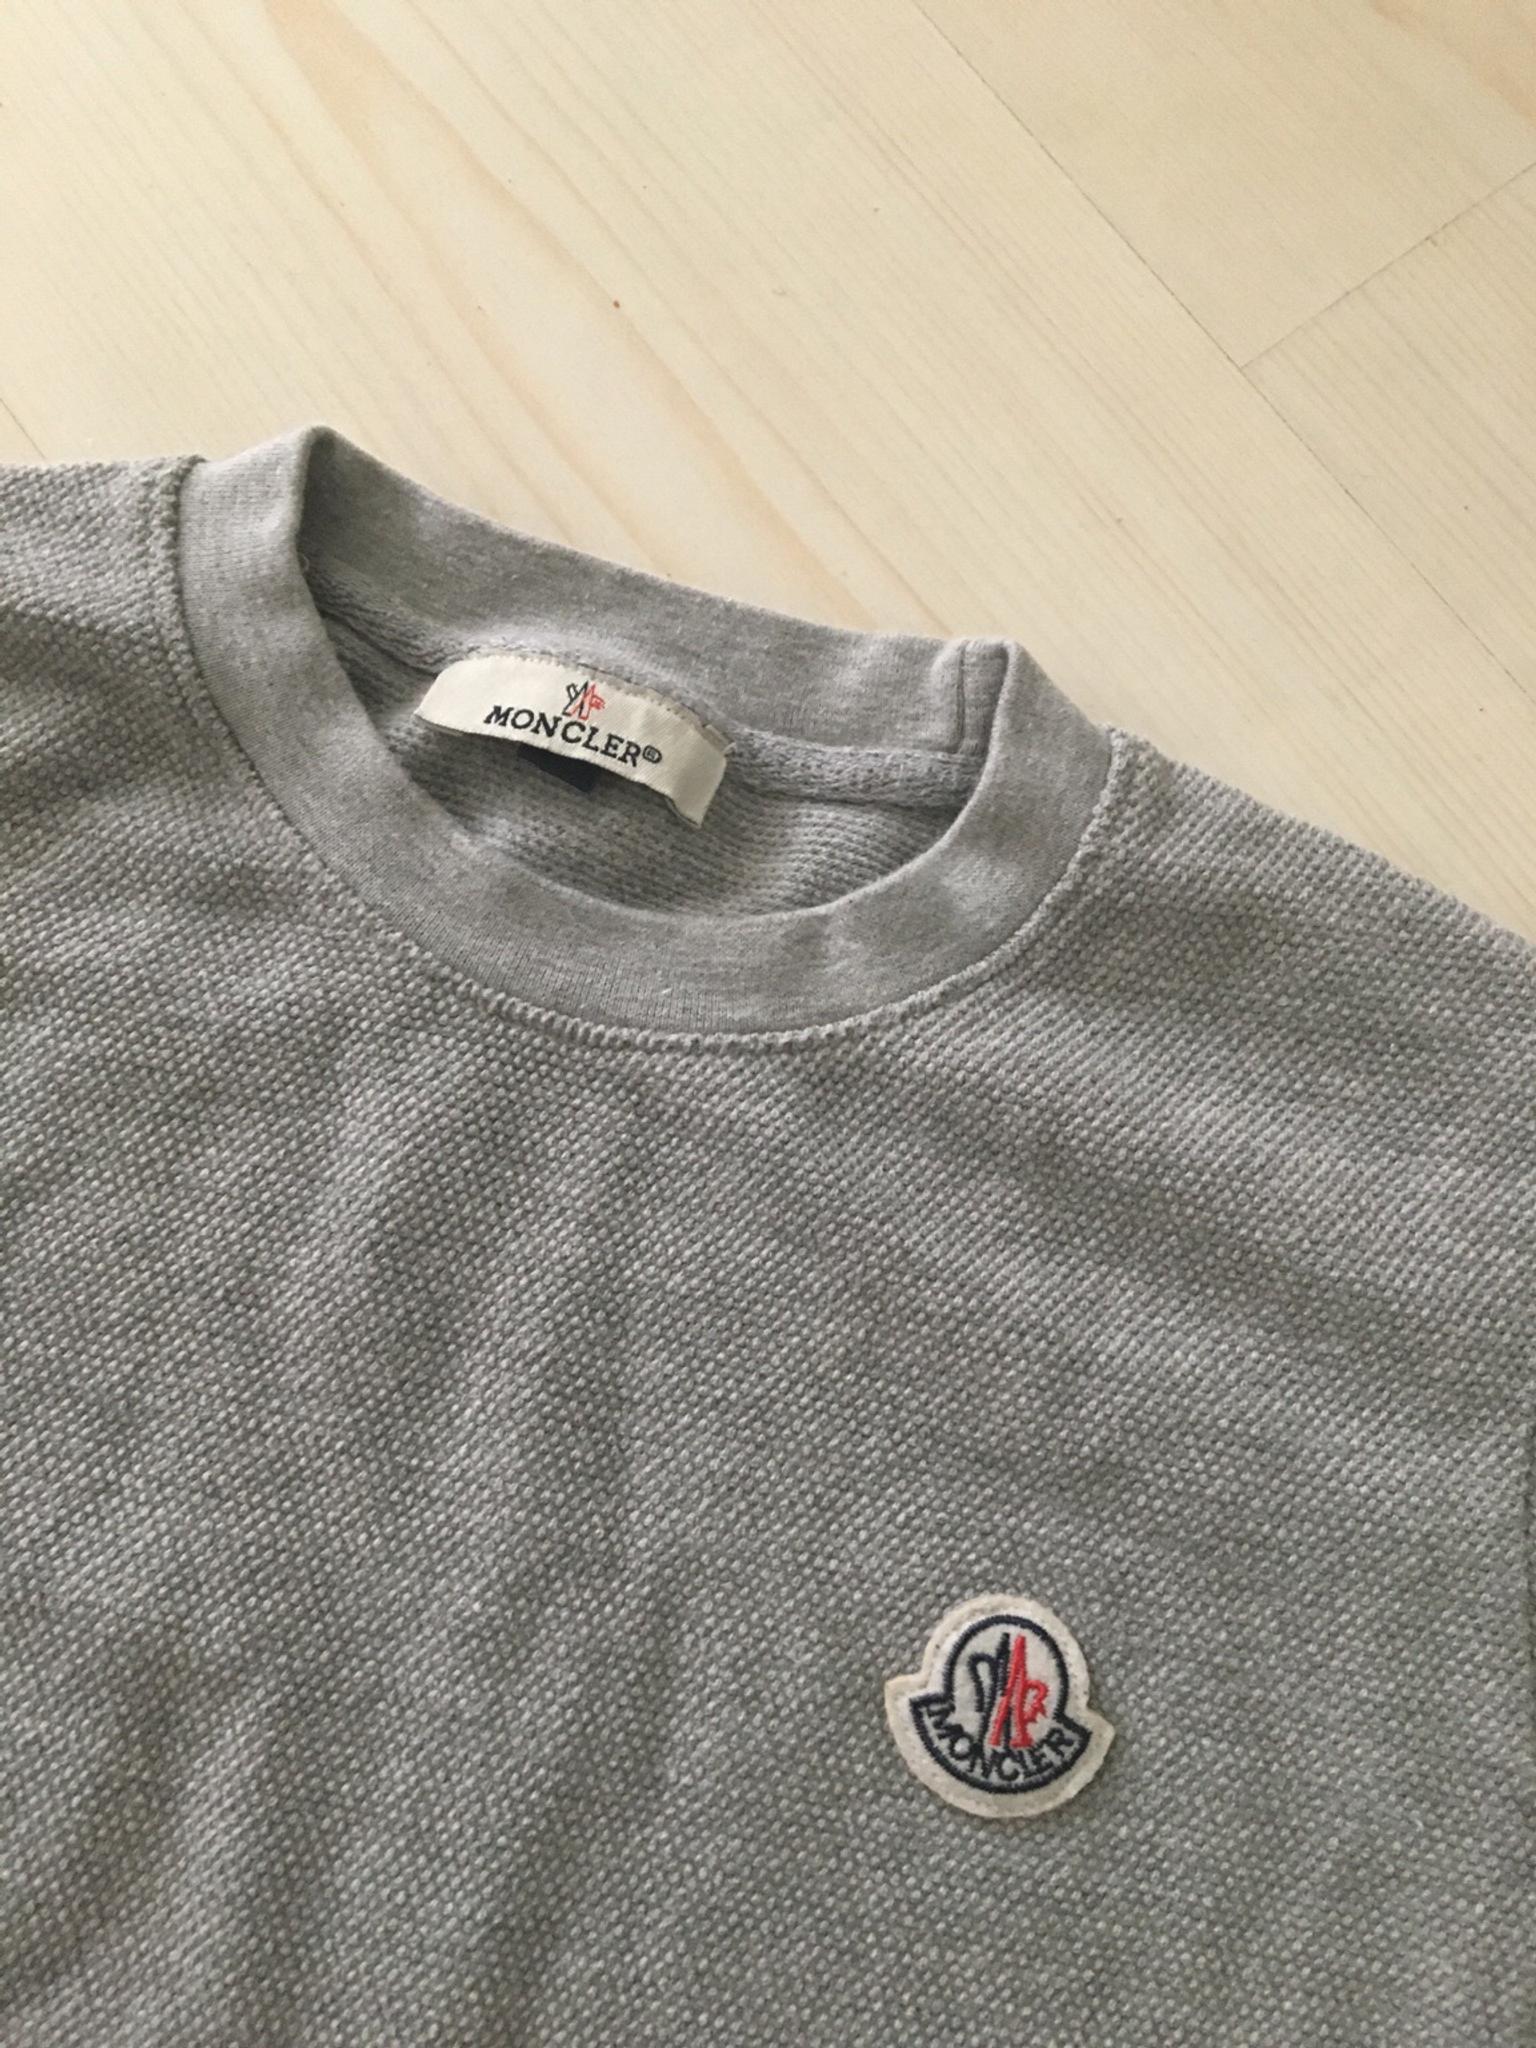 Moncler jumper t Shirt Size Small in 